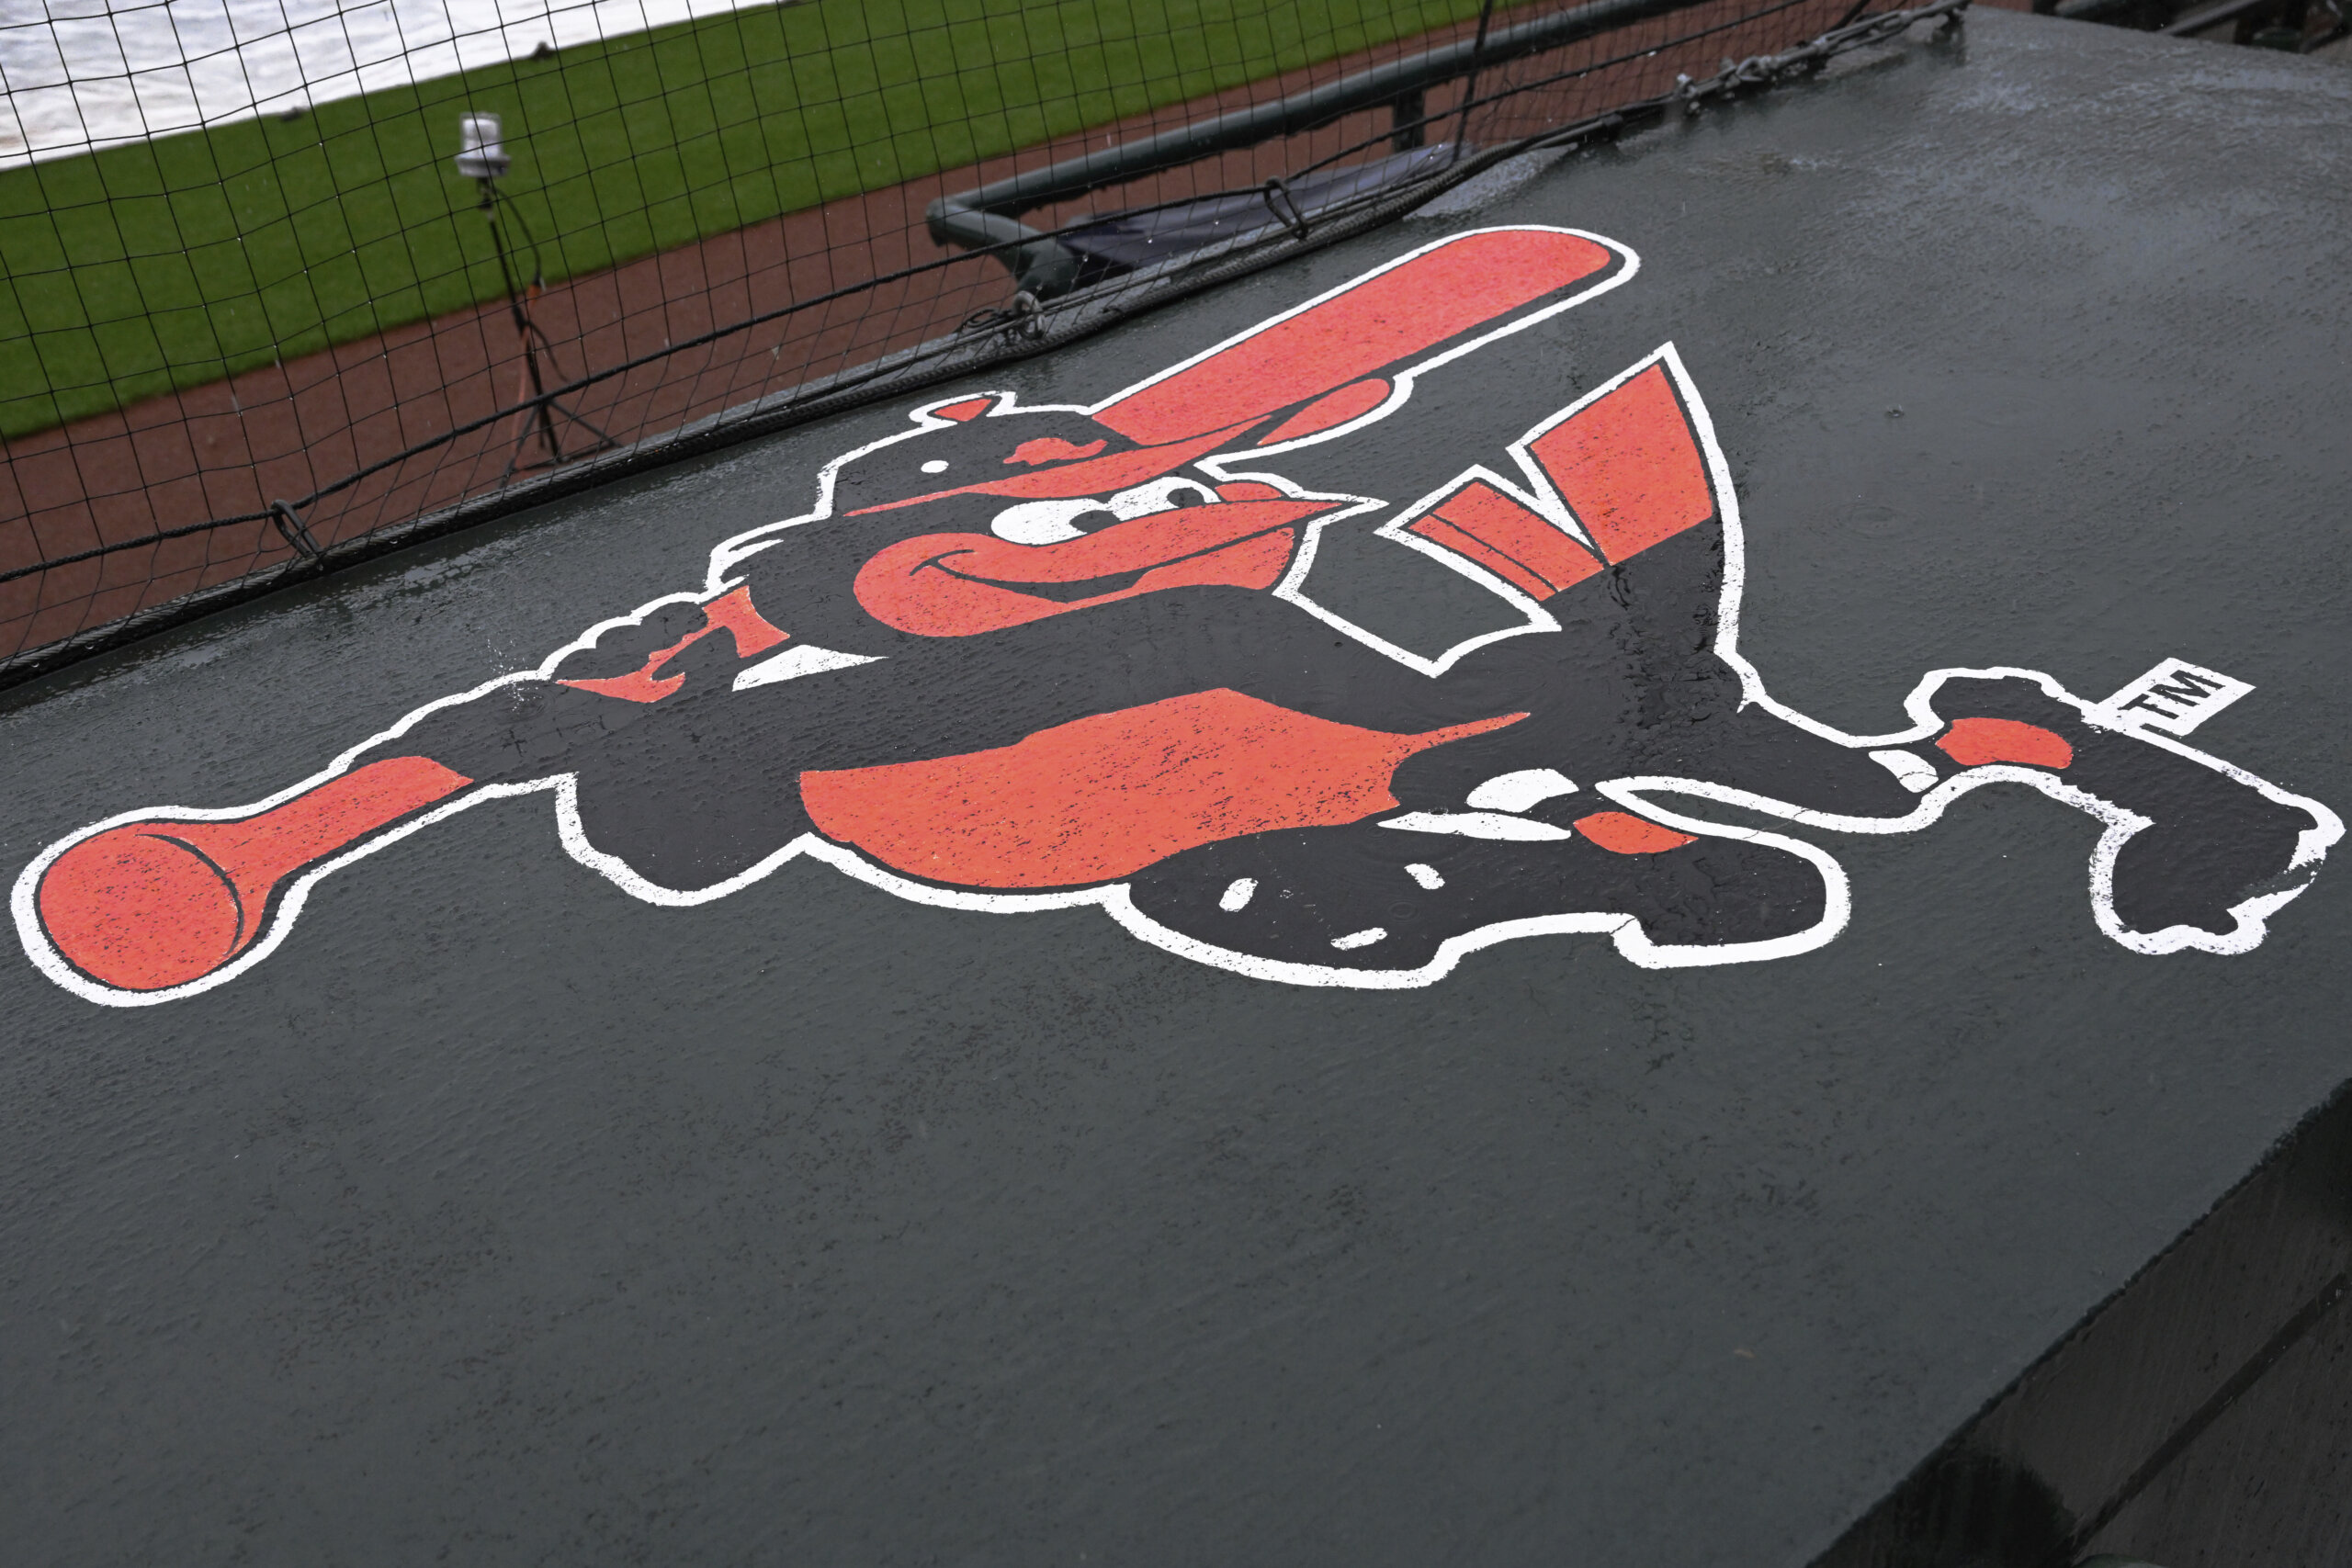 After charmed season in Charm City, Orioles ready for playoff baseball's  return to Baltimore